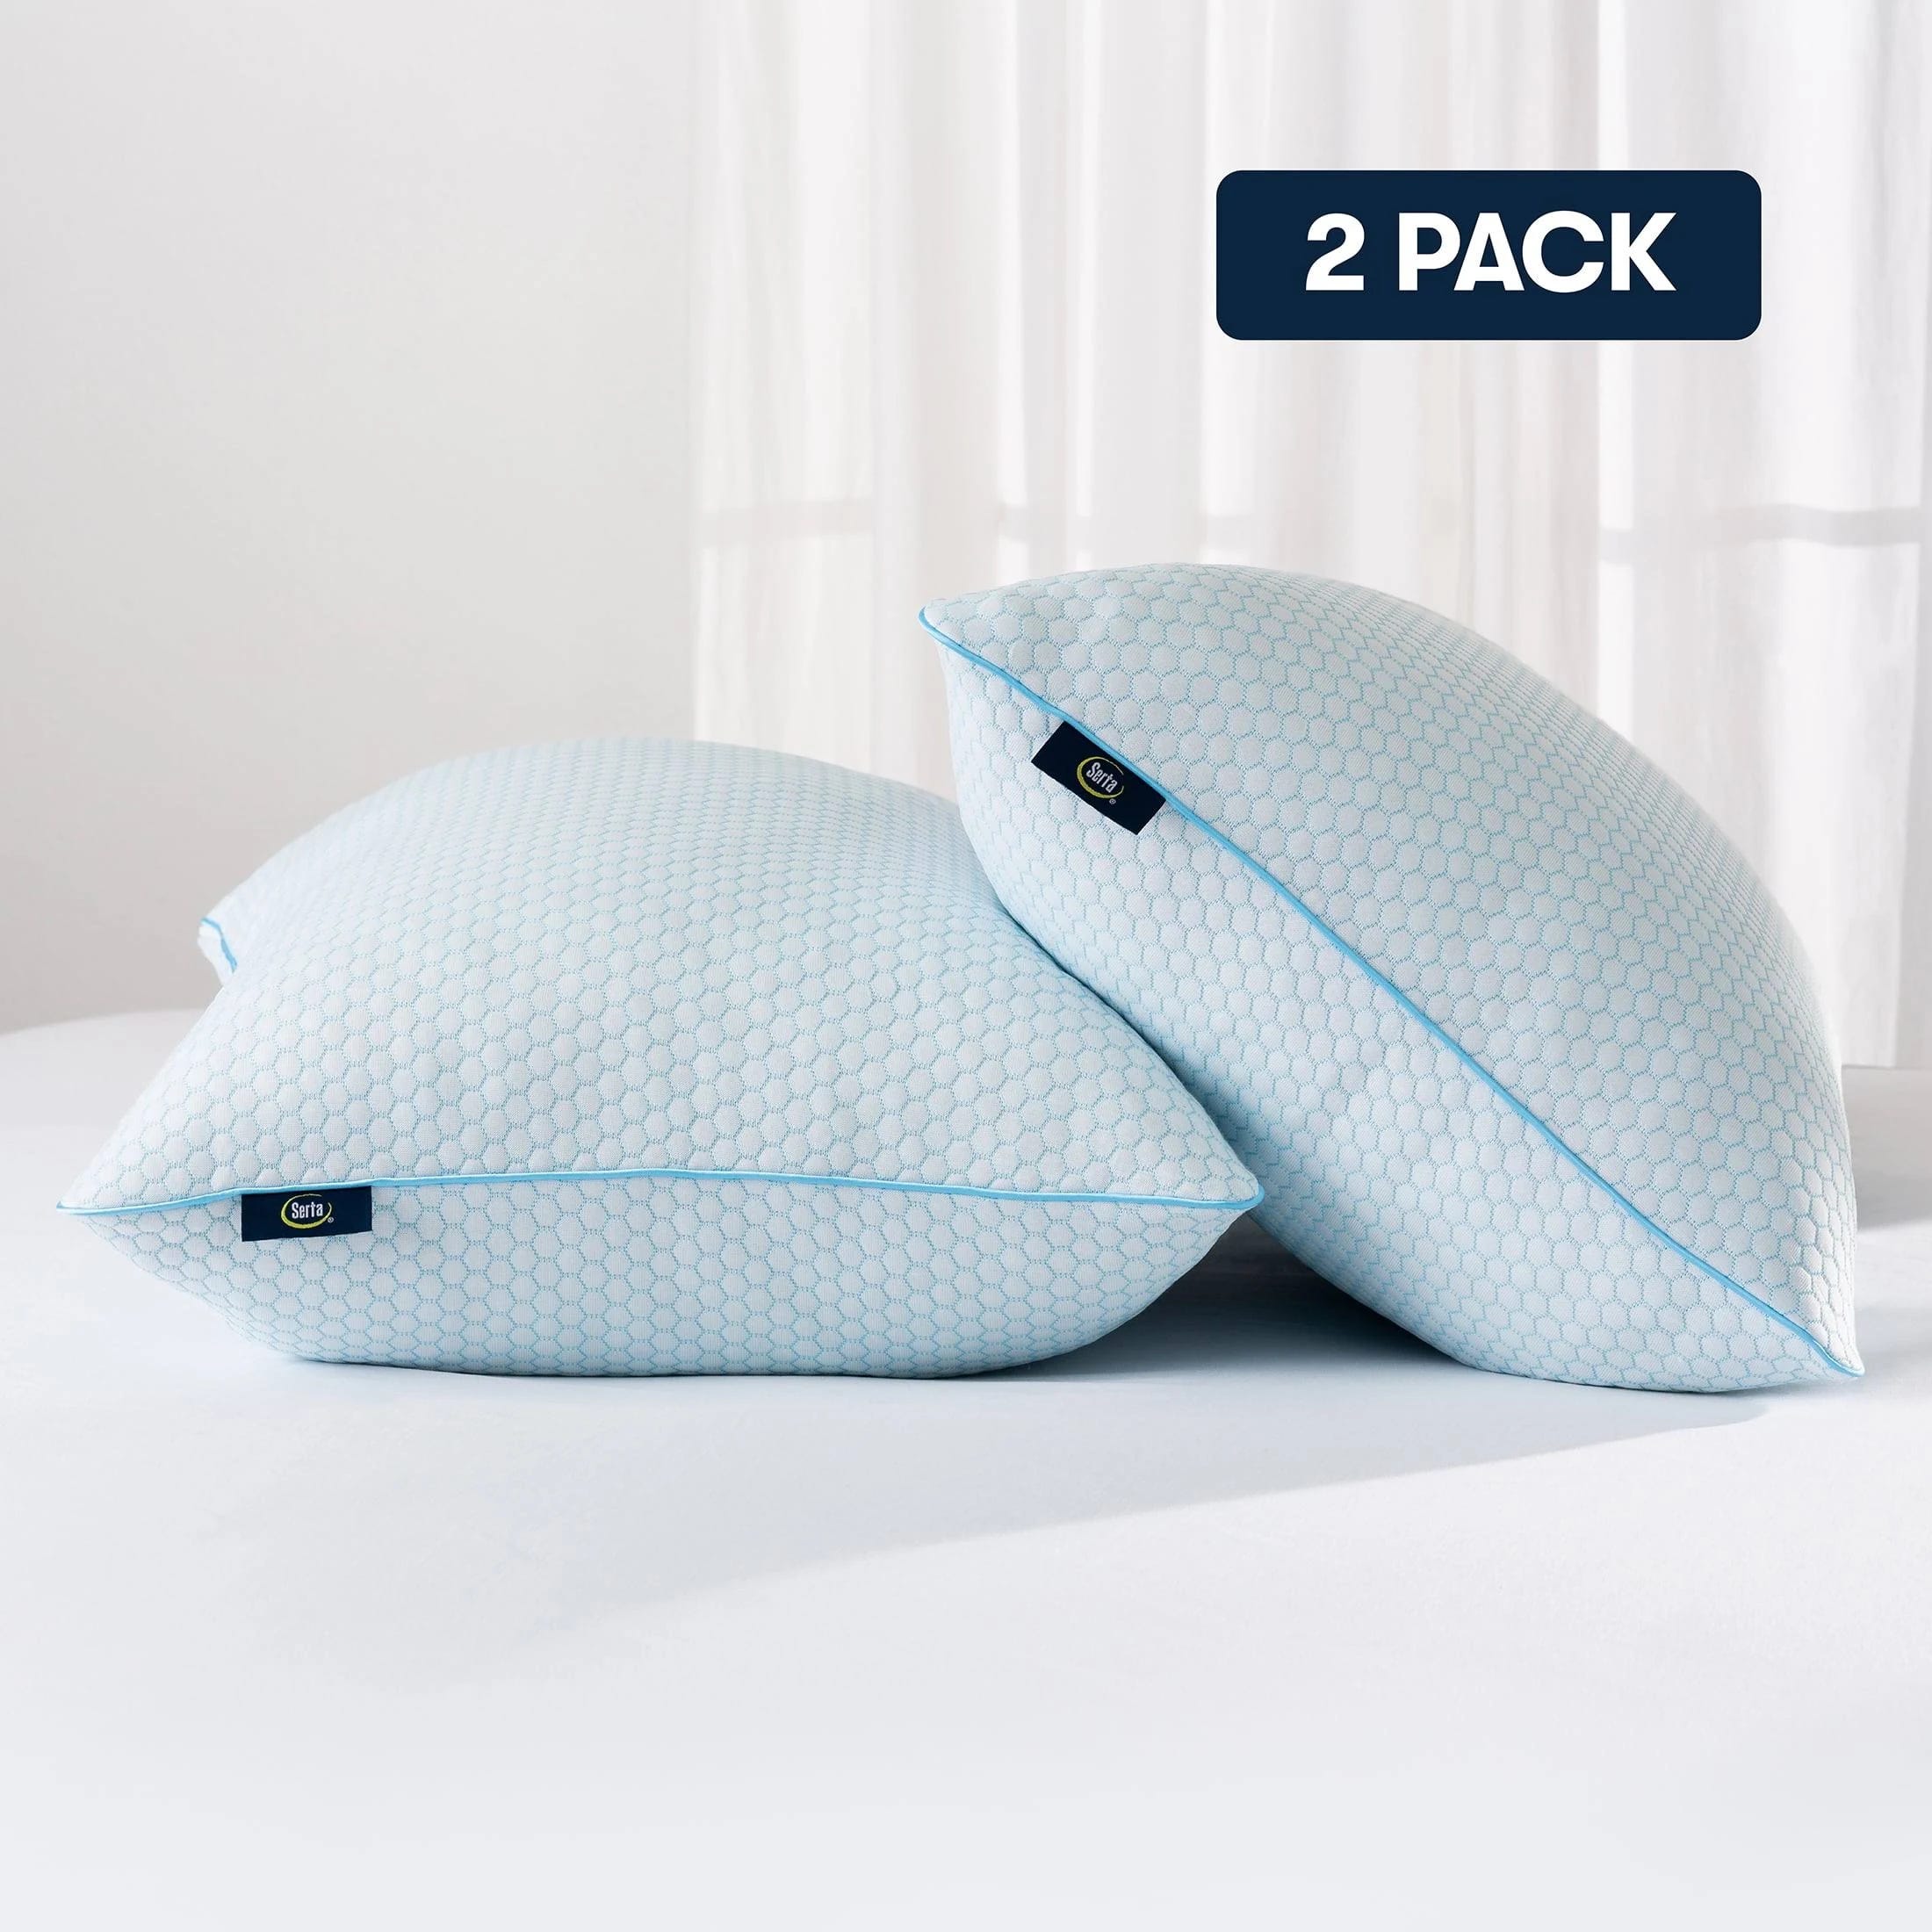 Serta Cool Blue Cluster Foam Pillow - 2 Pack (20 in x 28 in), Adjustable Support, Standard/Queen Sleep Surface | Image